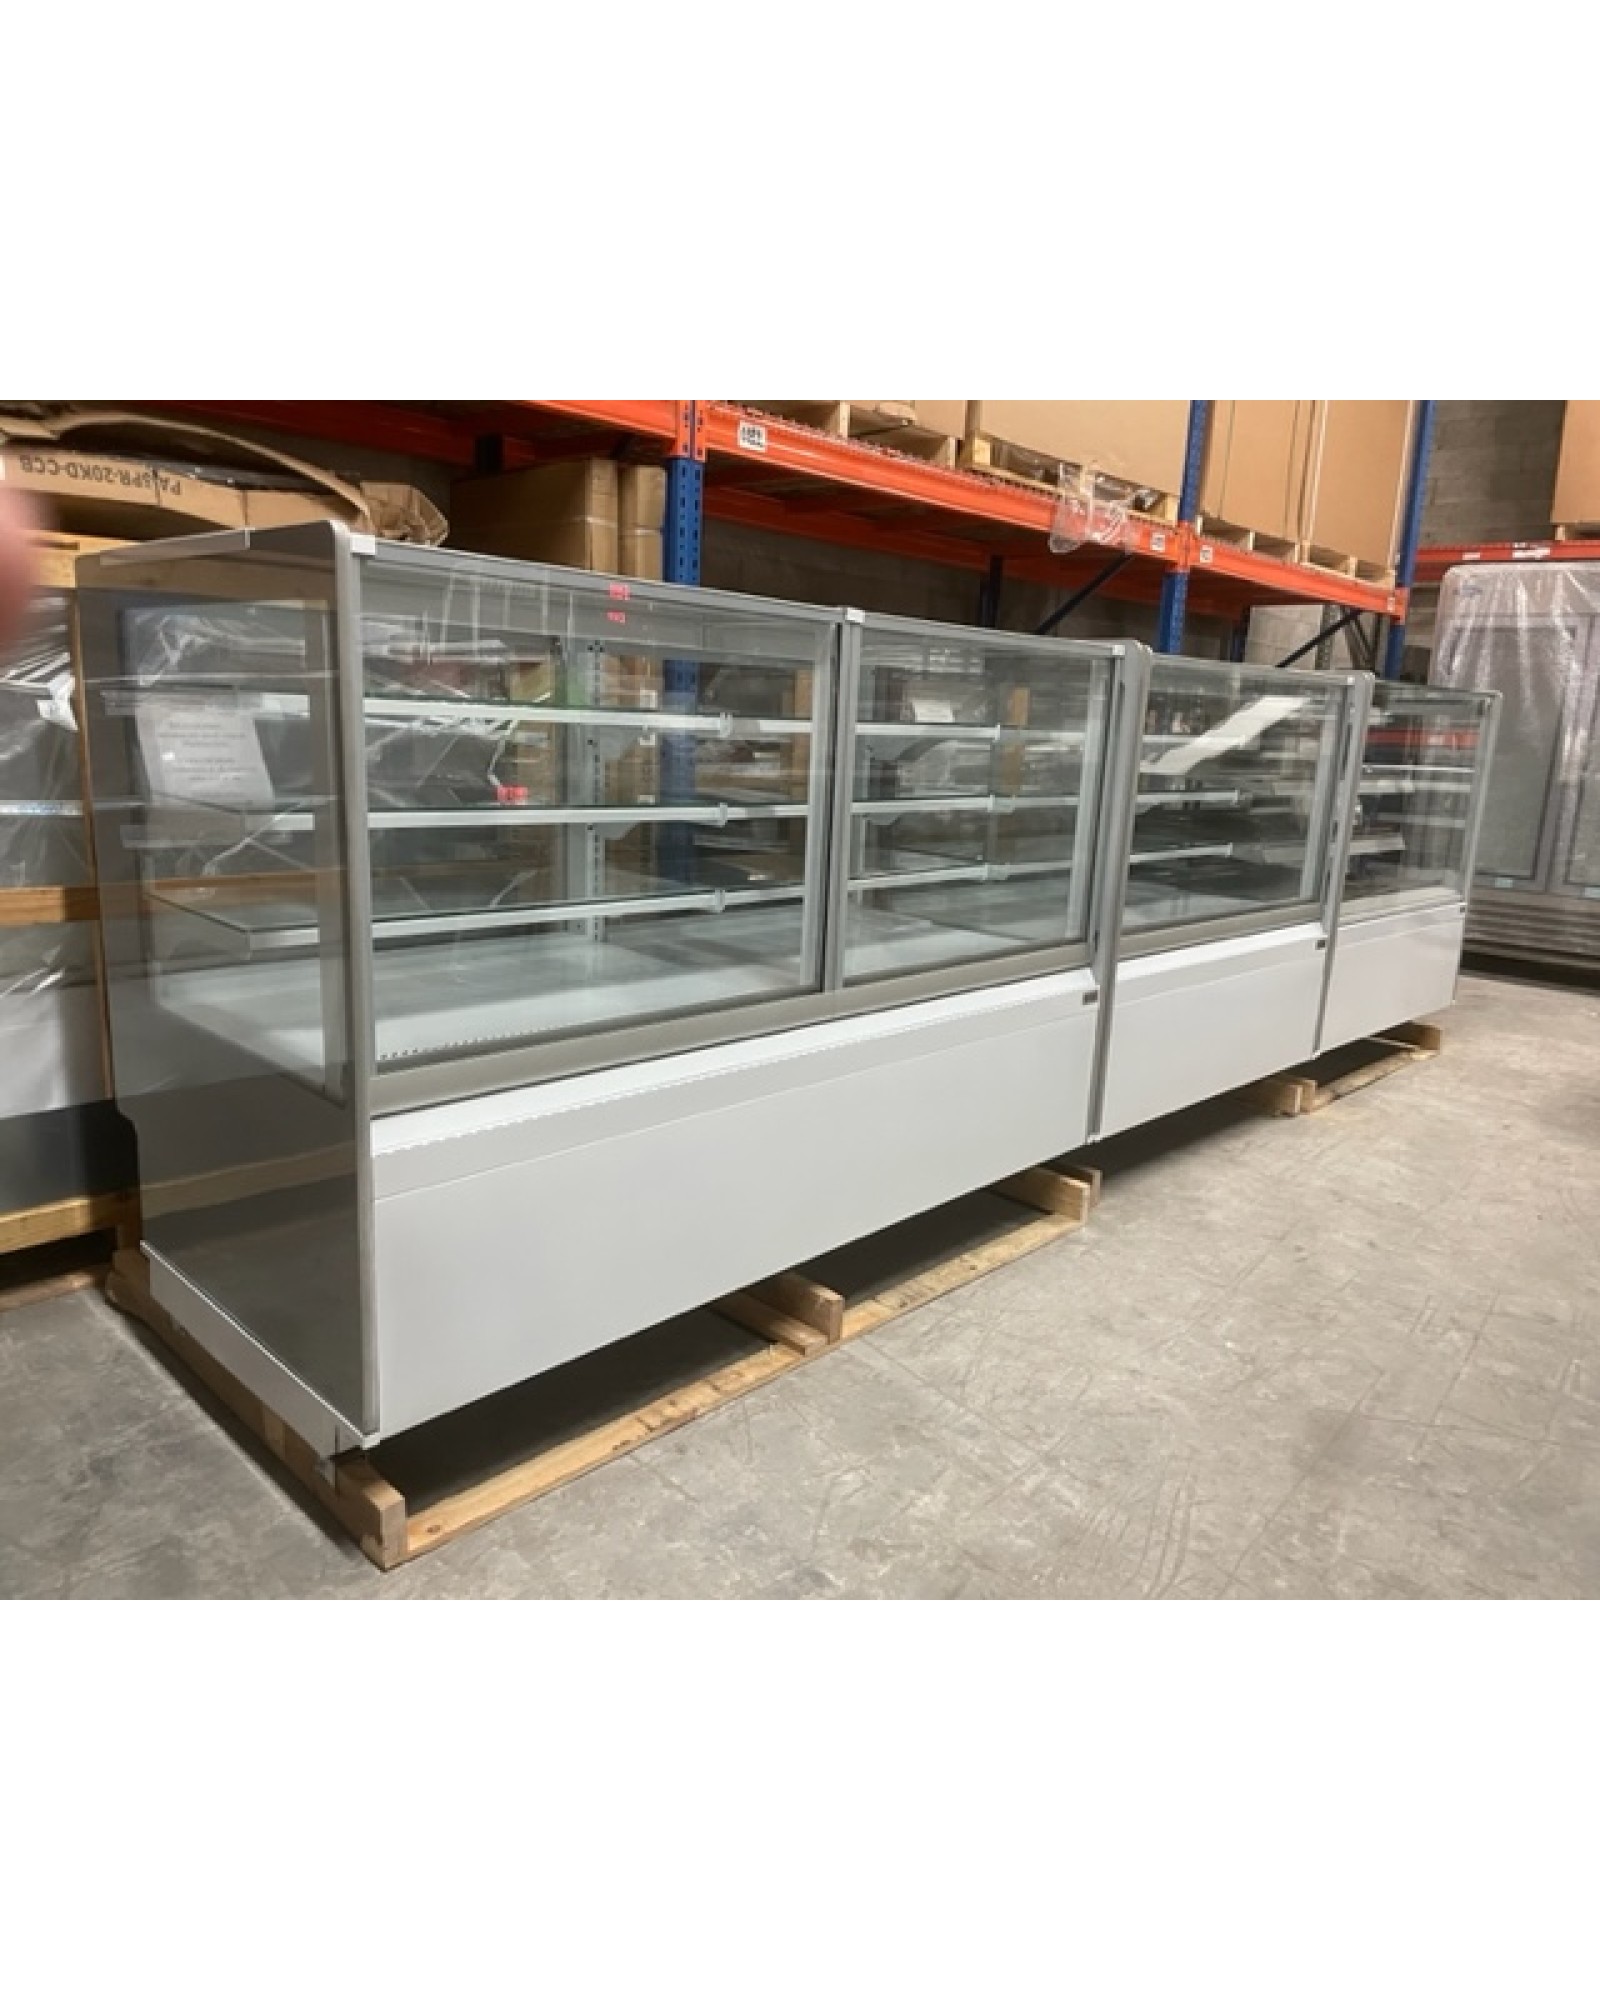 Bakery Case (Non-Refrigerated 75")